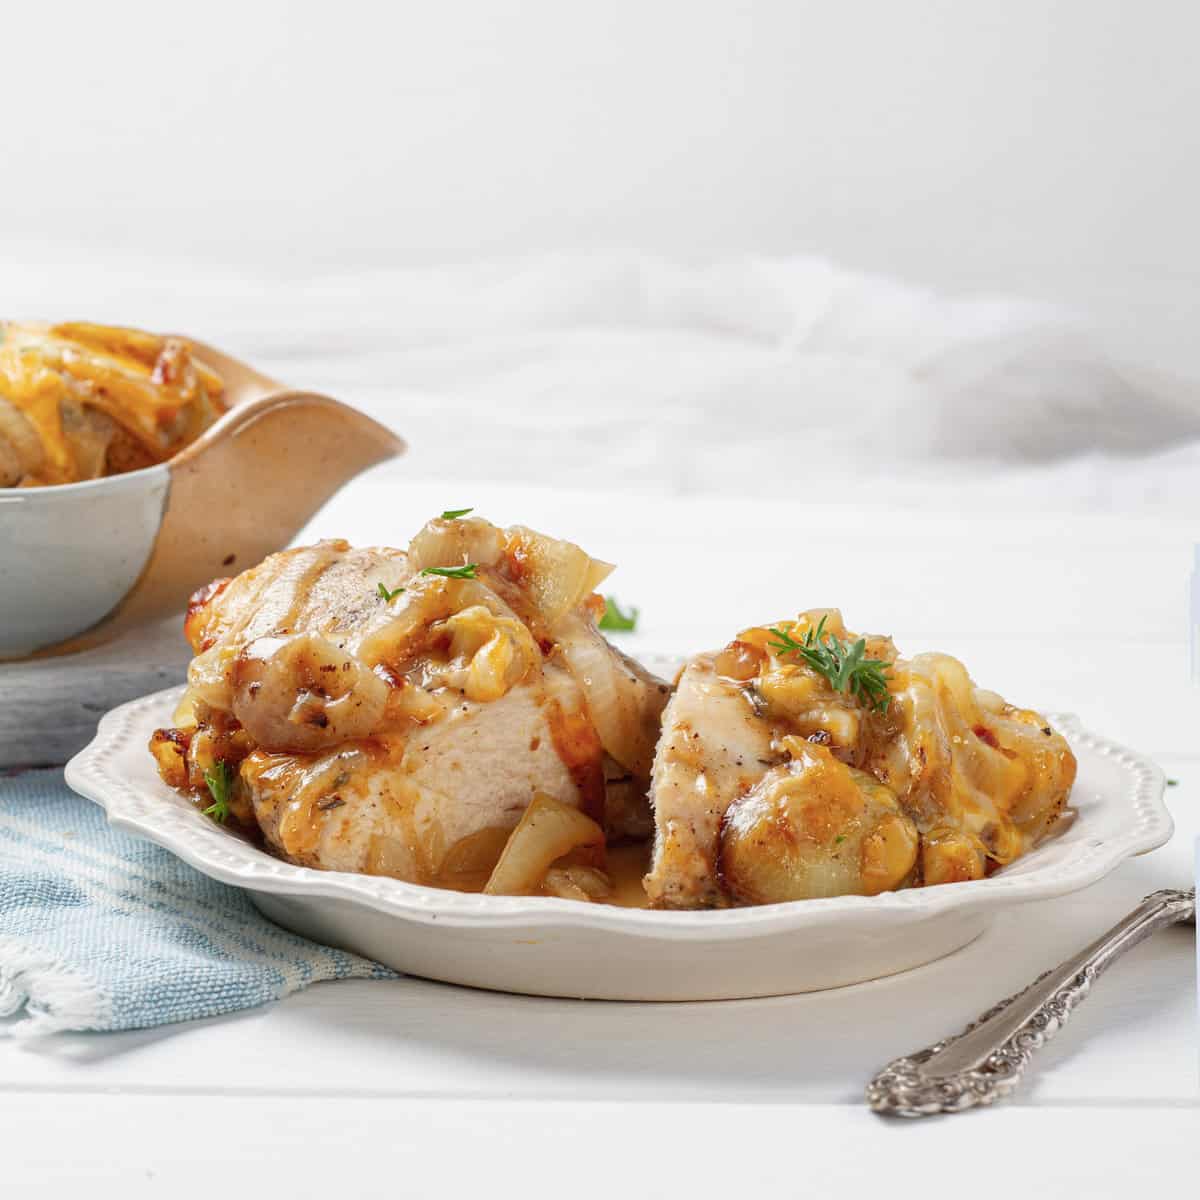 French Onion Chicken Casserole served in a plate